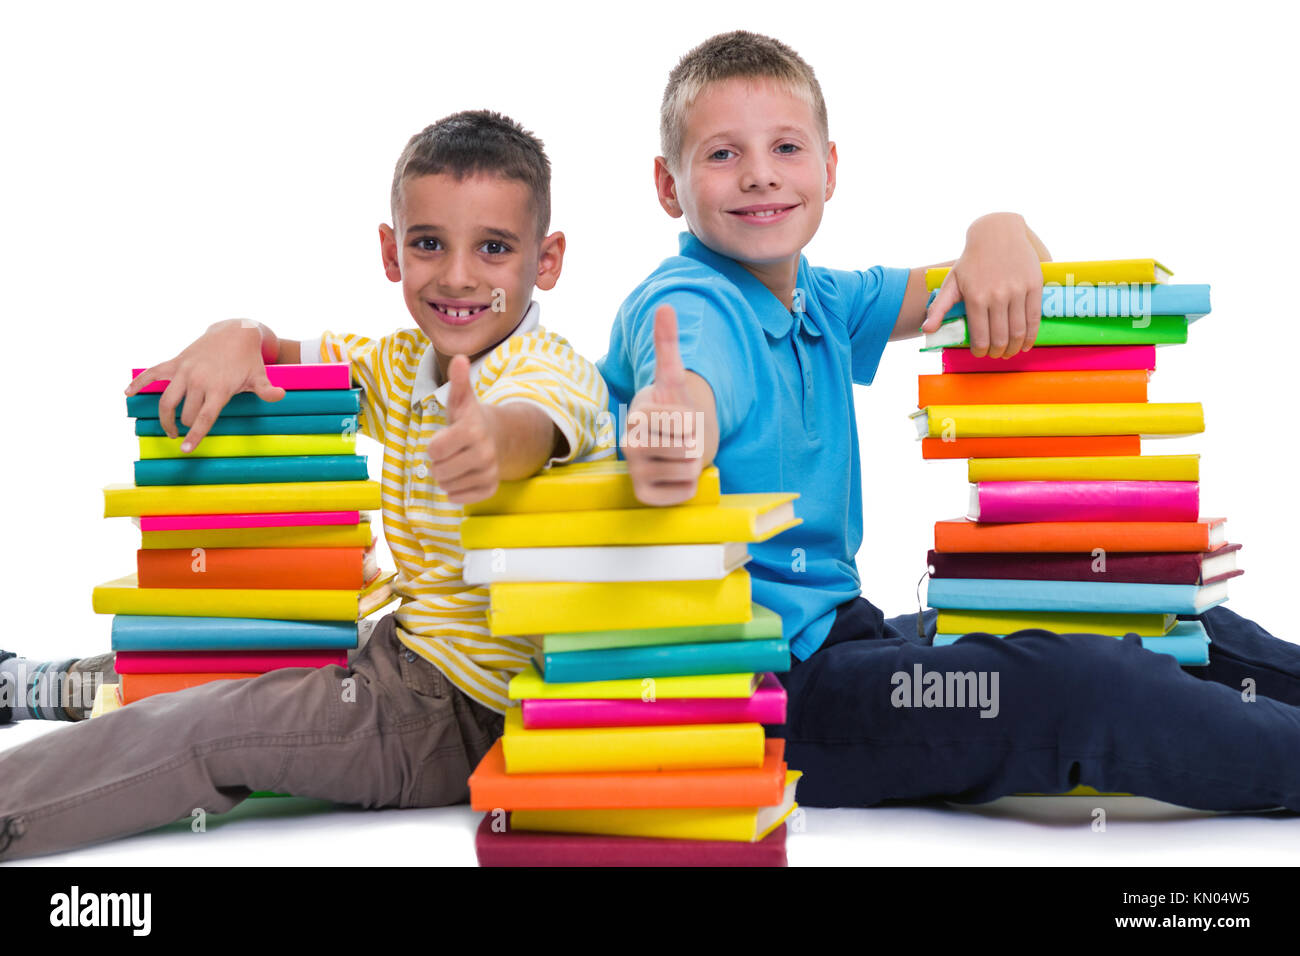 two smiling schoolboys showing thumbs up gesture Stock Photo